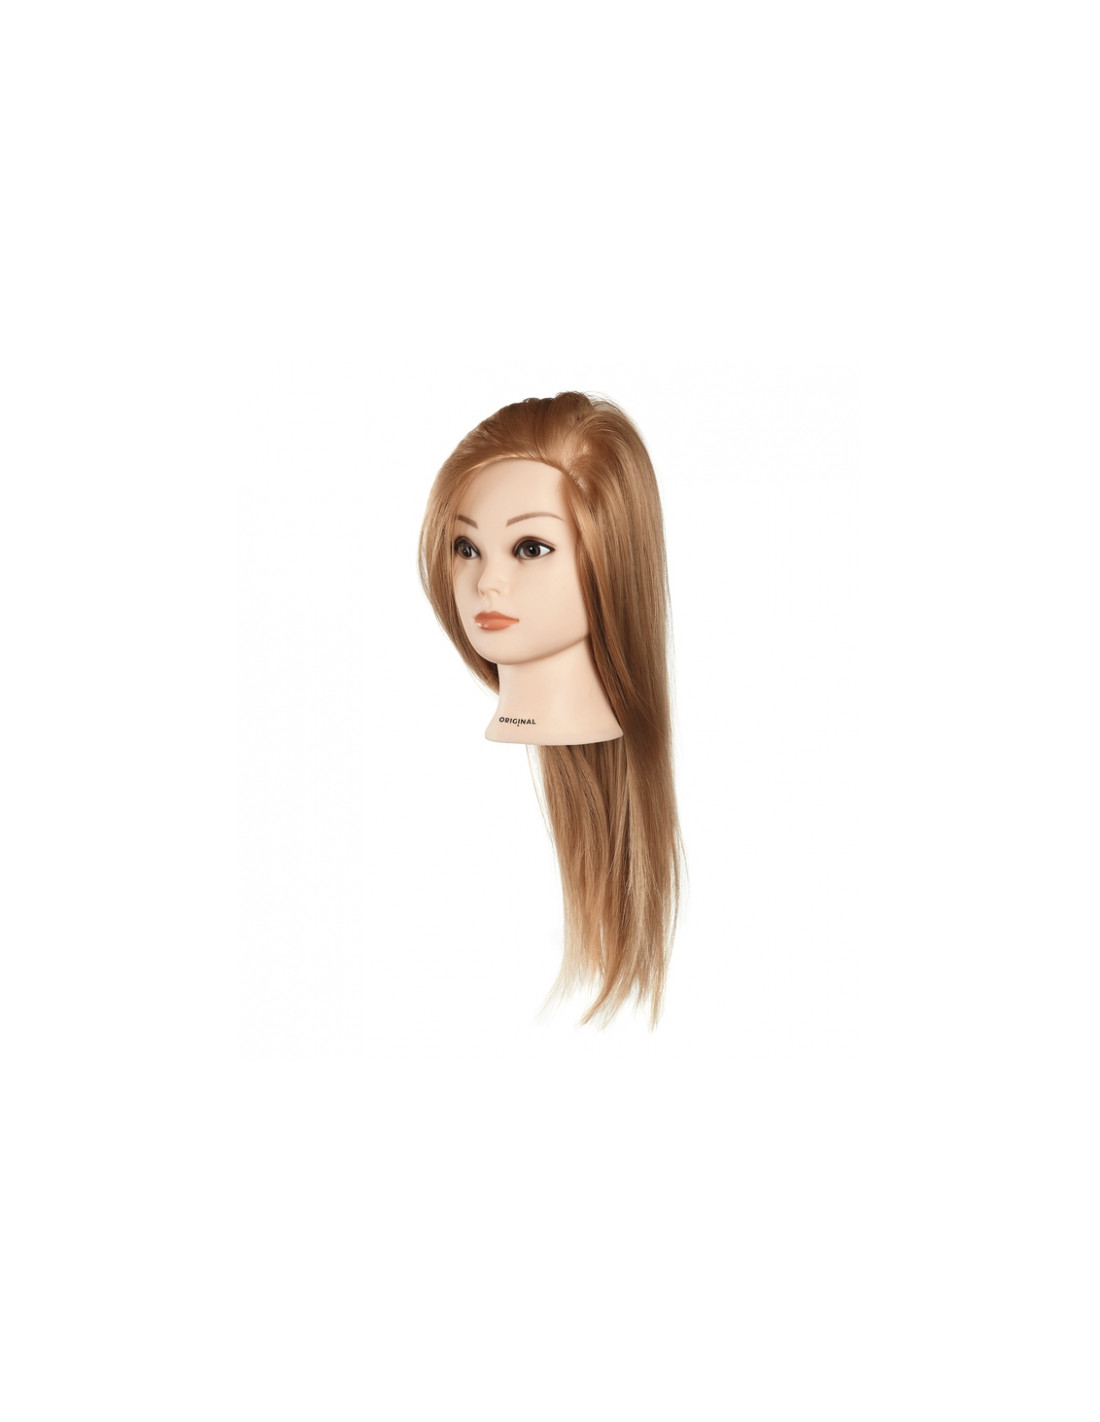 Female mannequin head ANABELLE